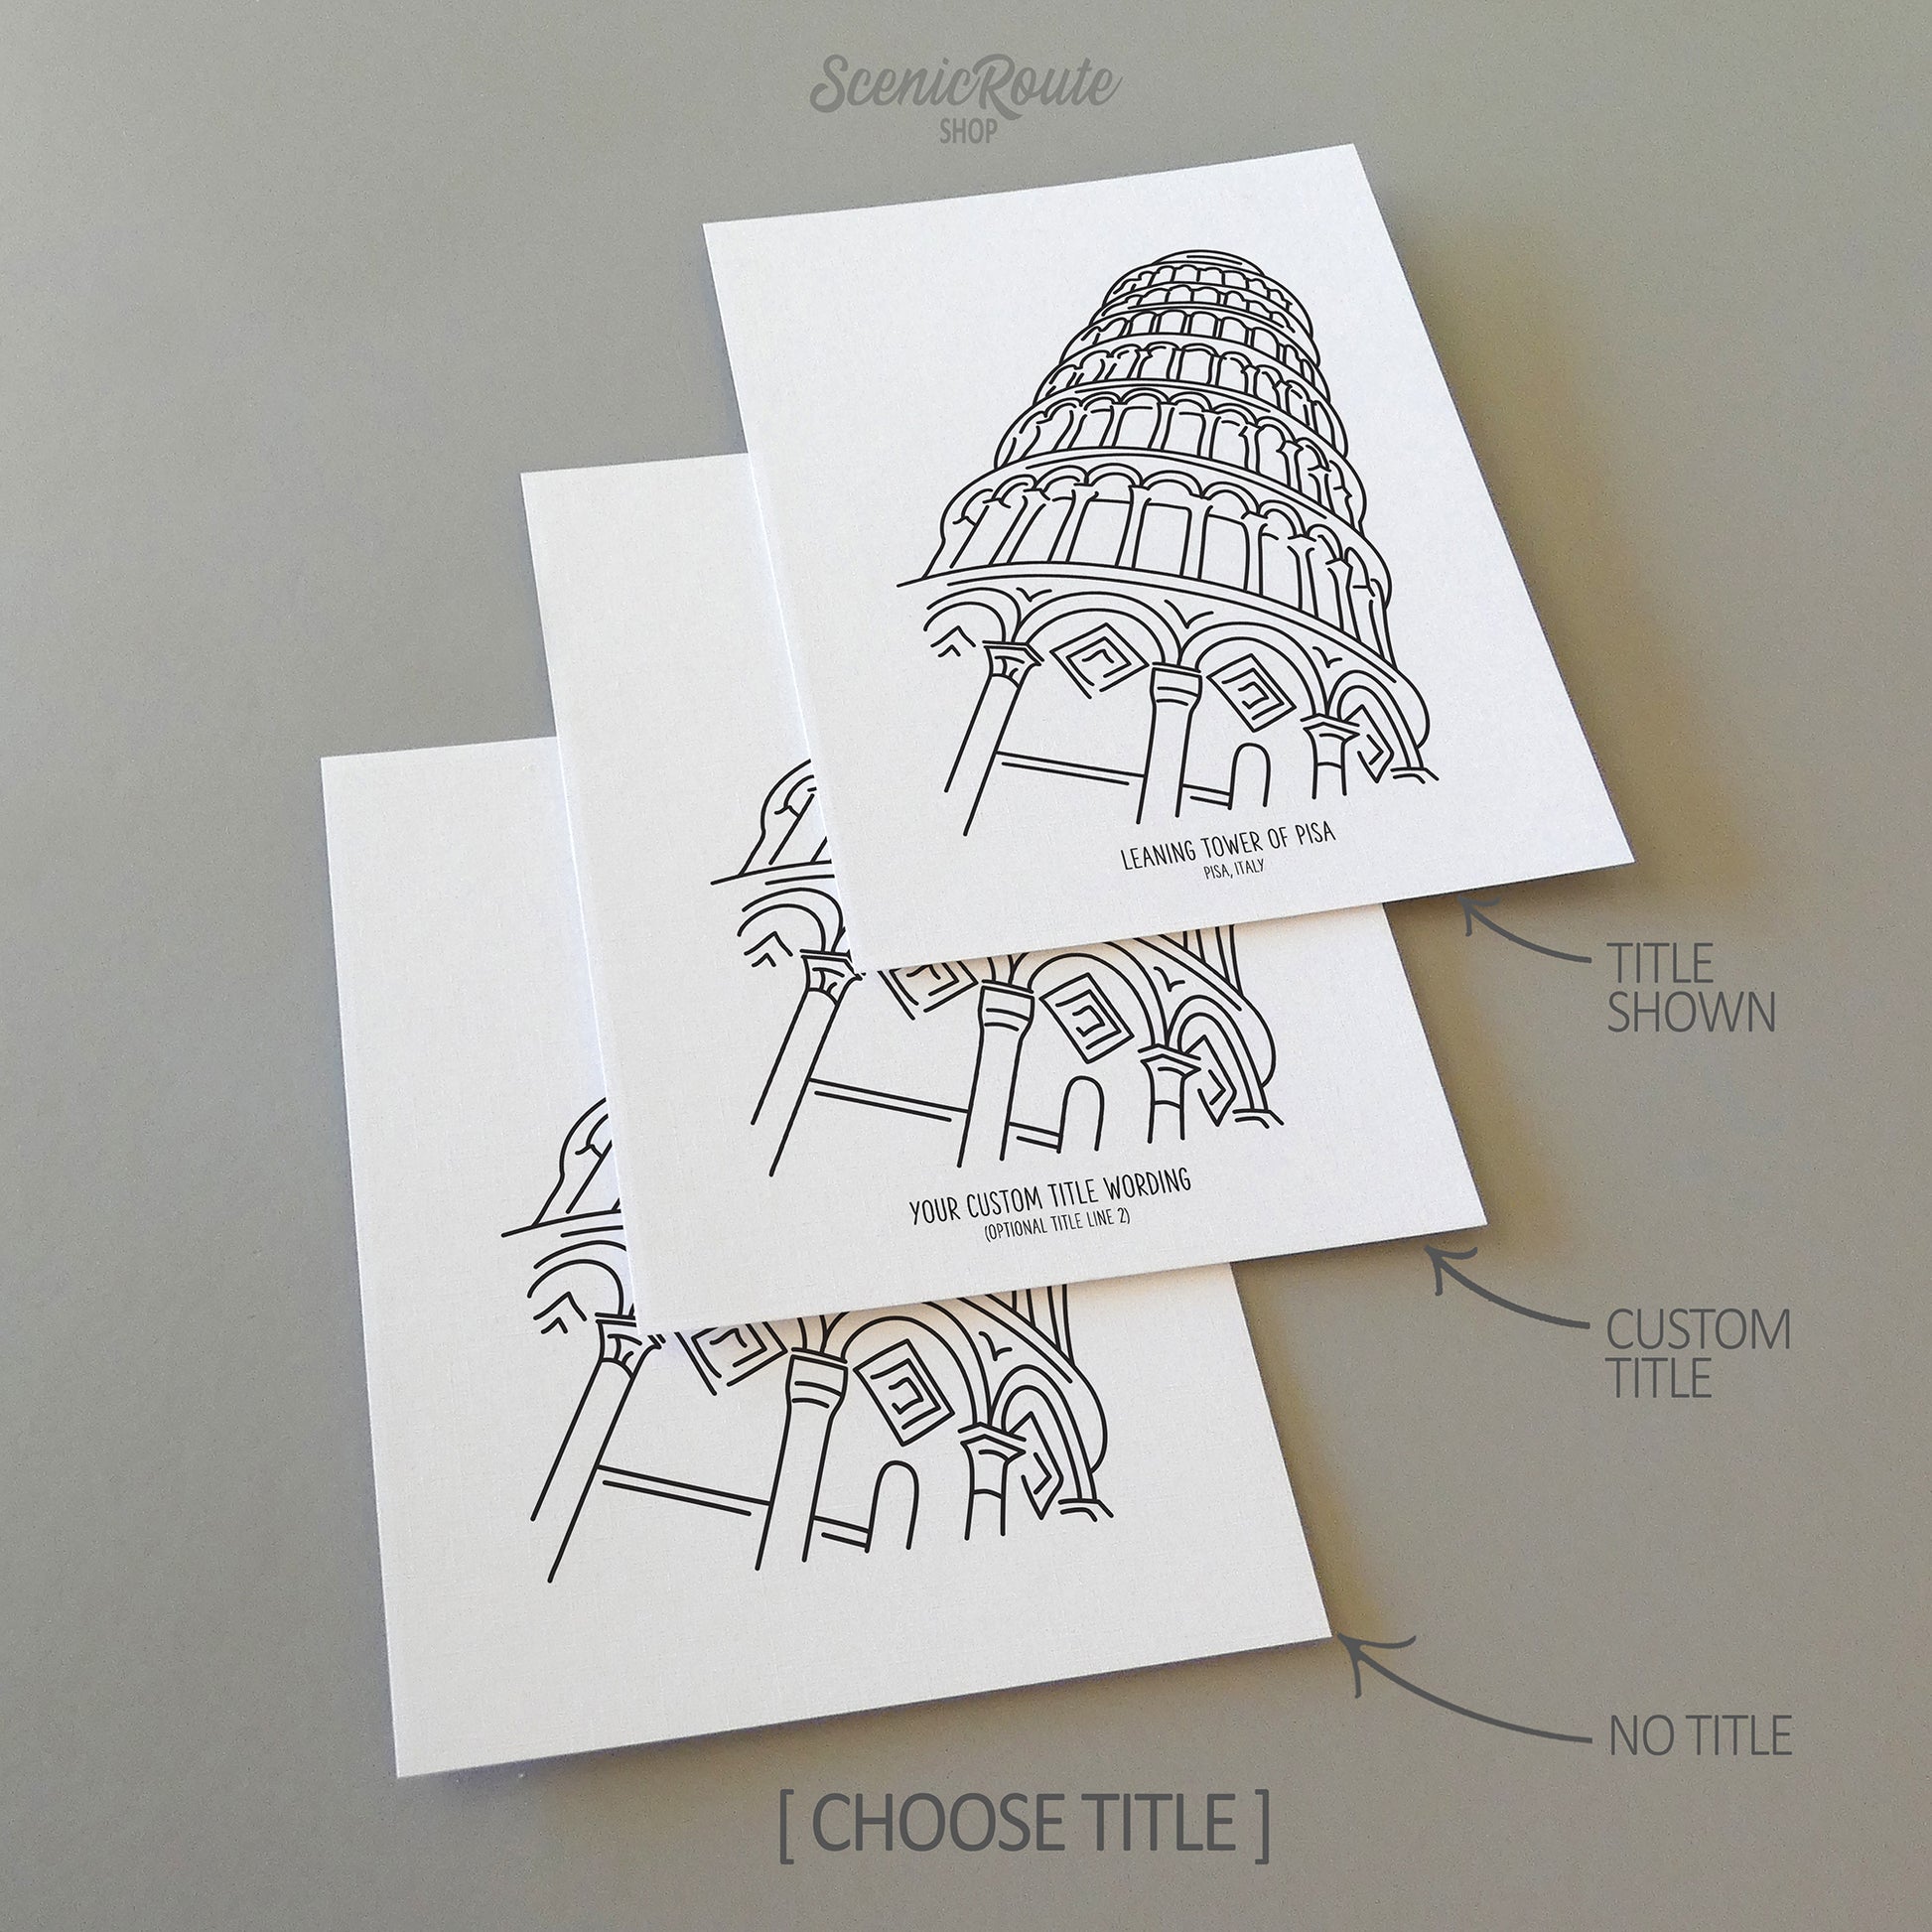 Three line art drawings of the Leaning Tower of Pisa in Italy on white linen paper with a gray background.  The pieces are shown with title options that can be chosen and personalized.